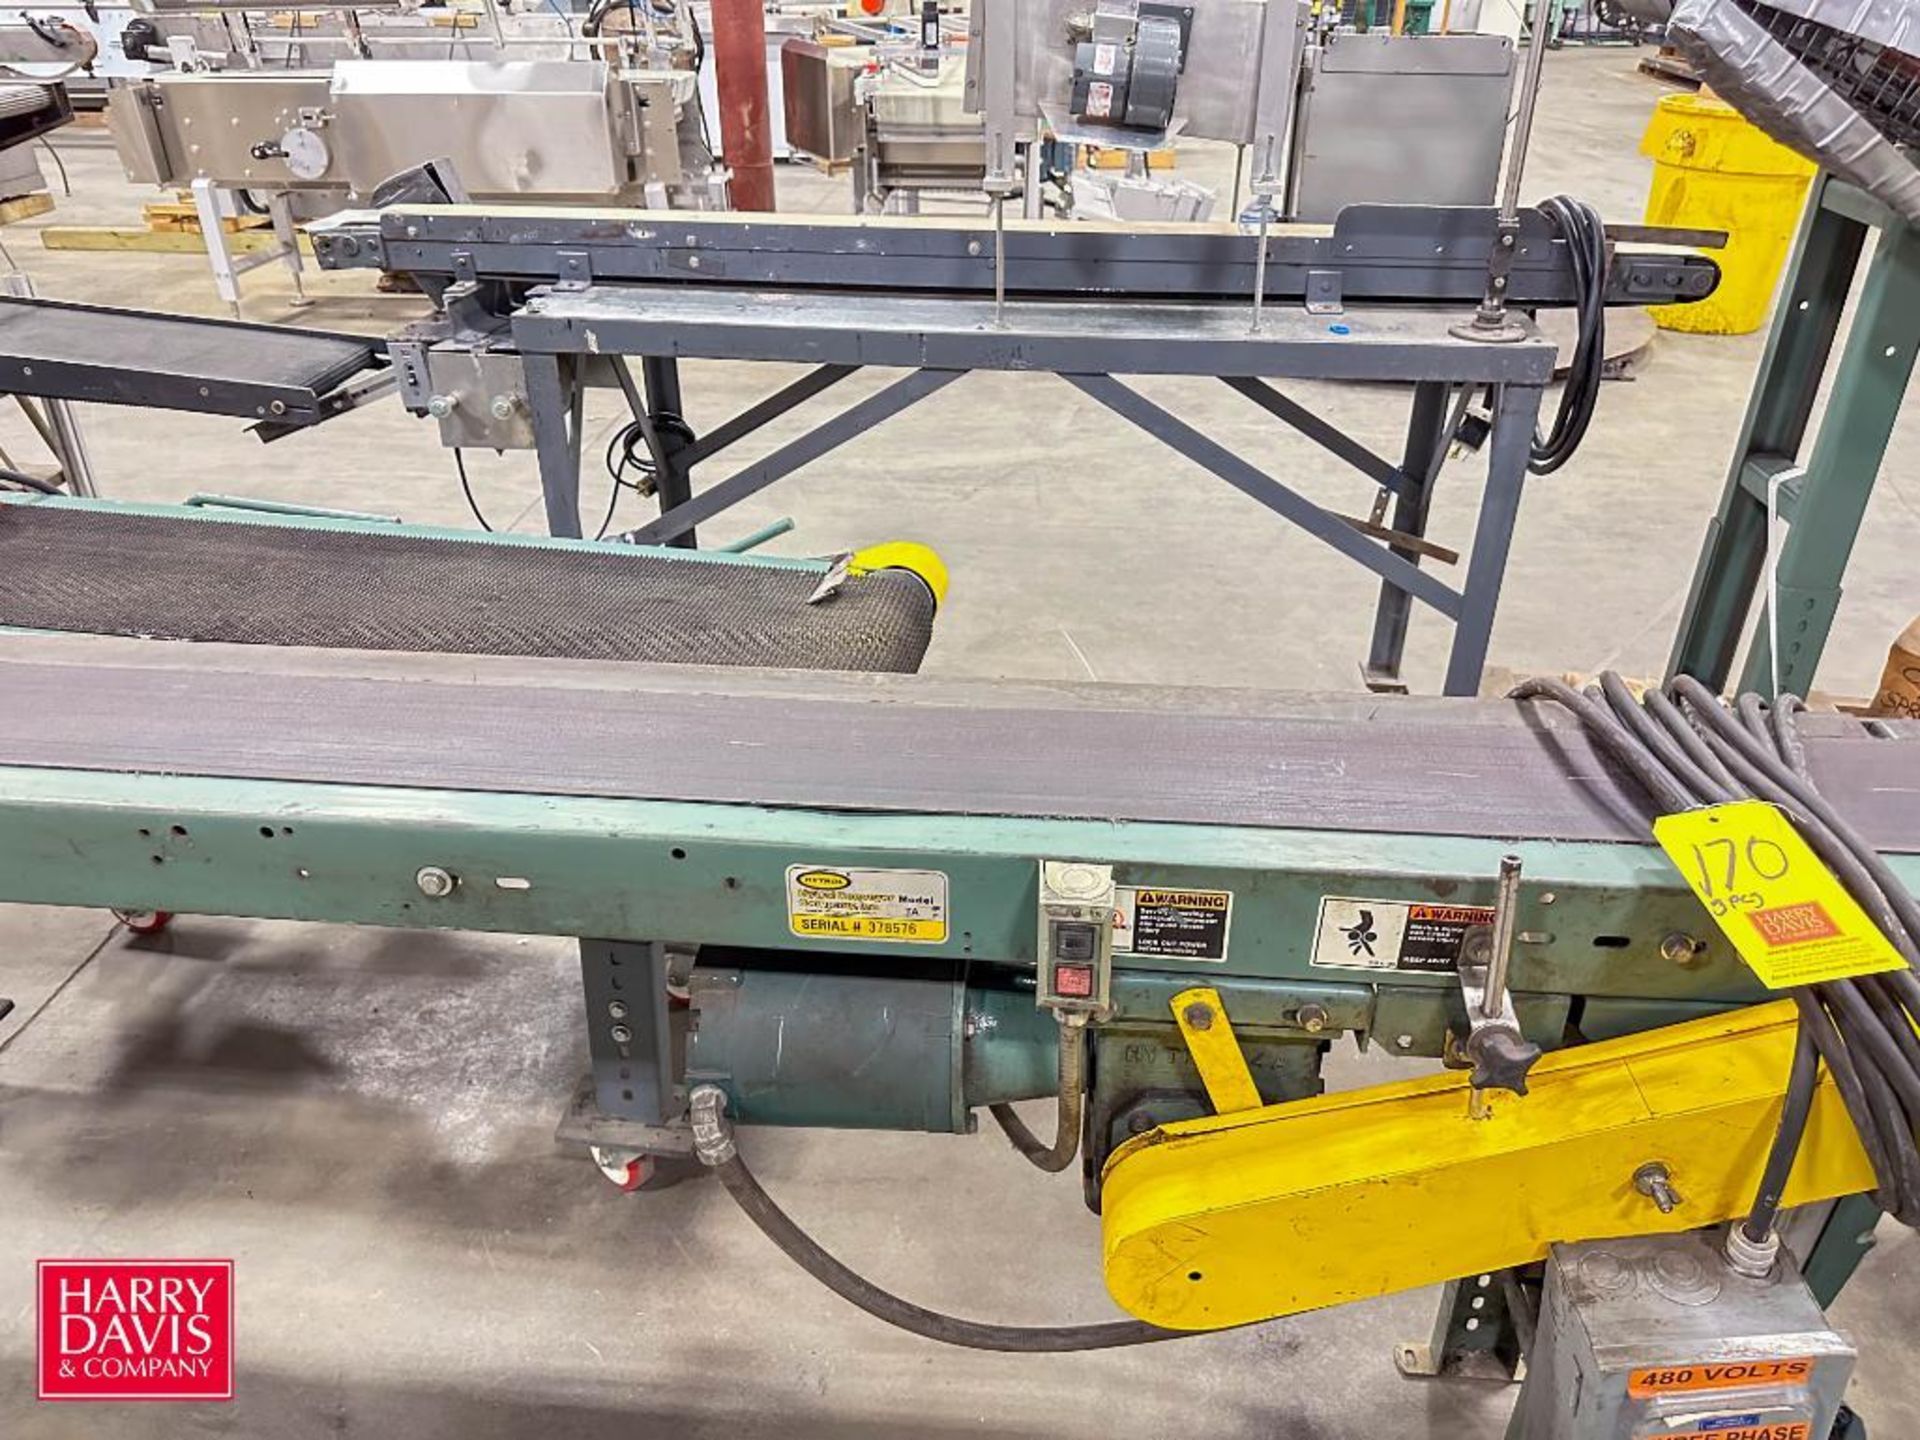 Hytrol and Other Power Belt Conveyors: up to 127" Length x 16" Width, (1) with Baldor